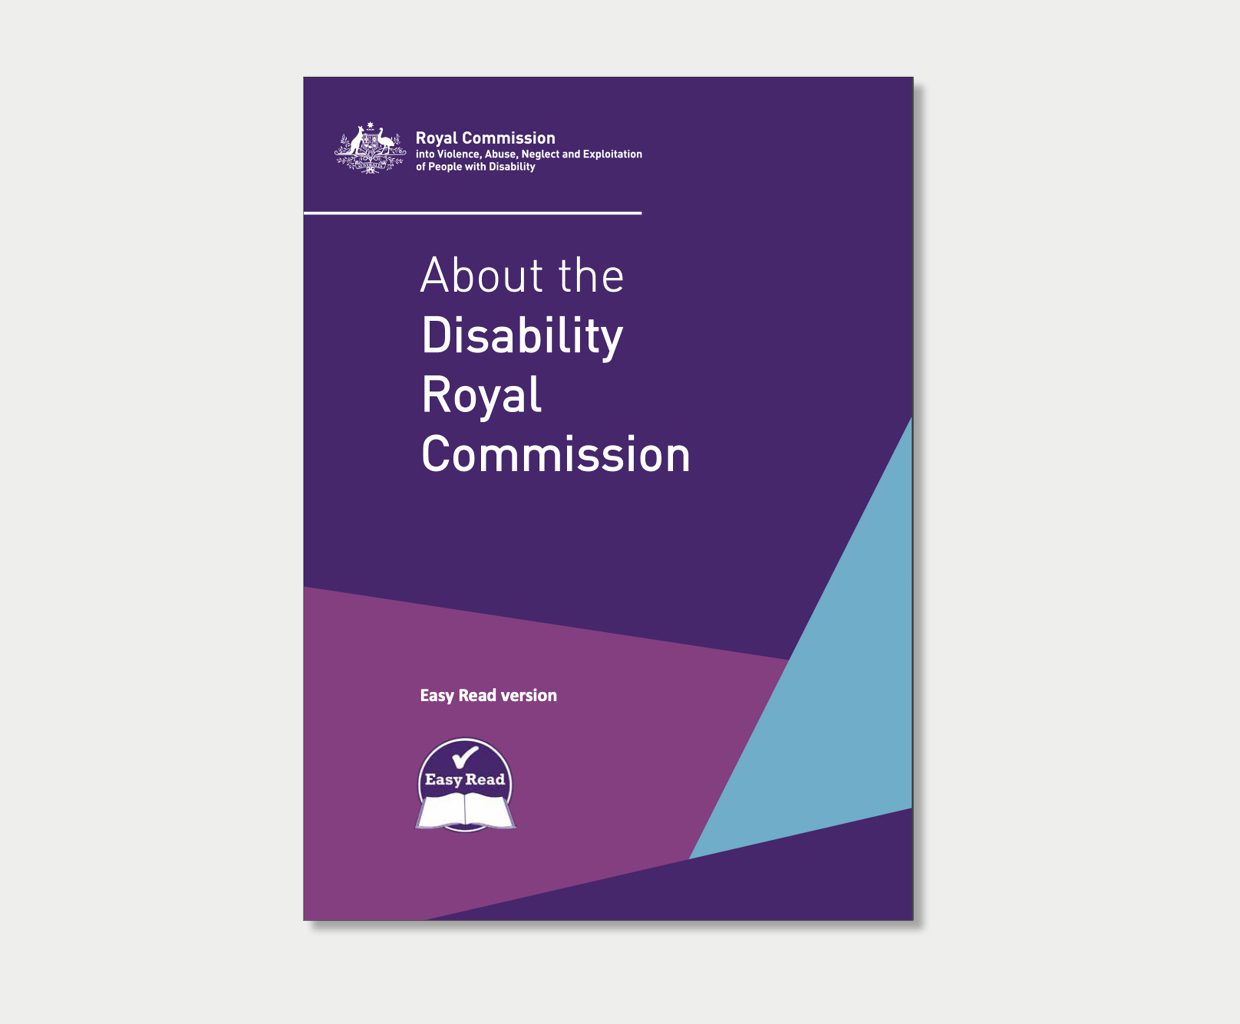 Disability Royal Commission. What is a Royal Commission?